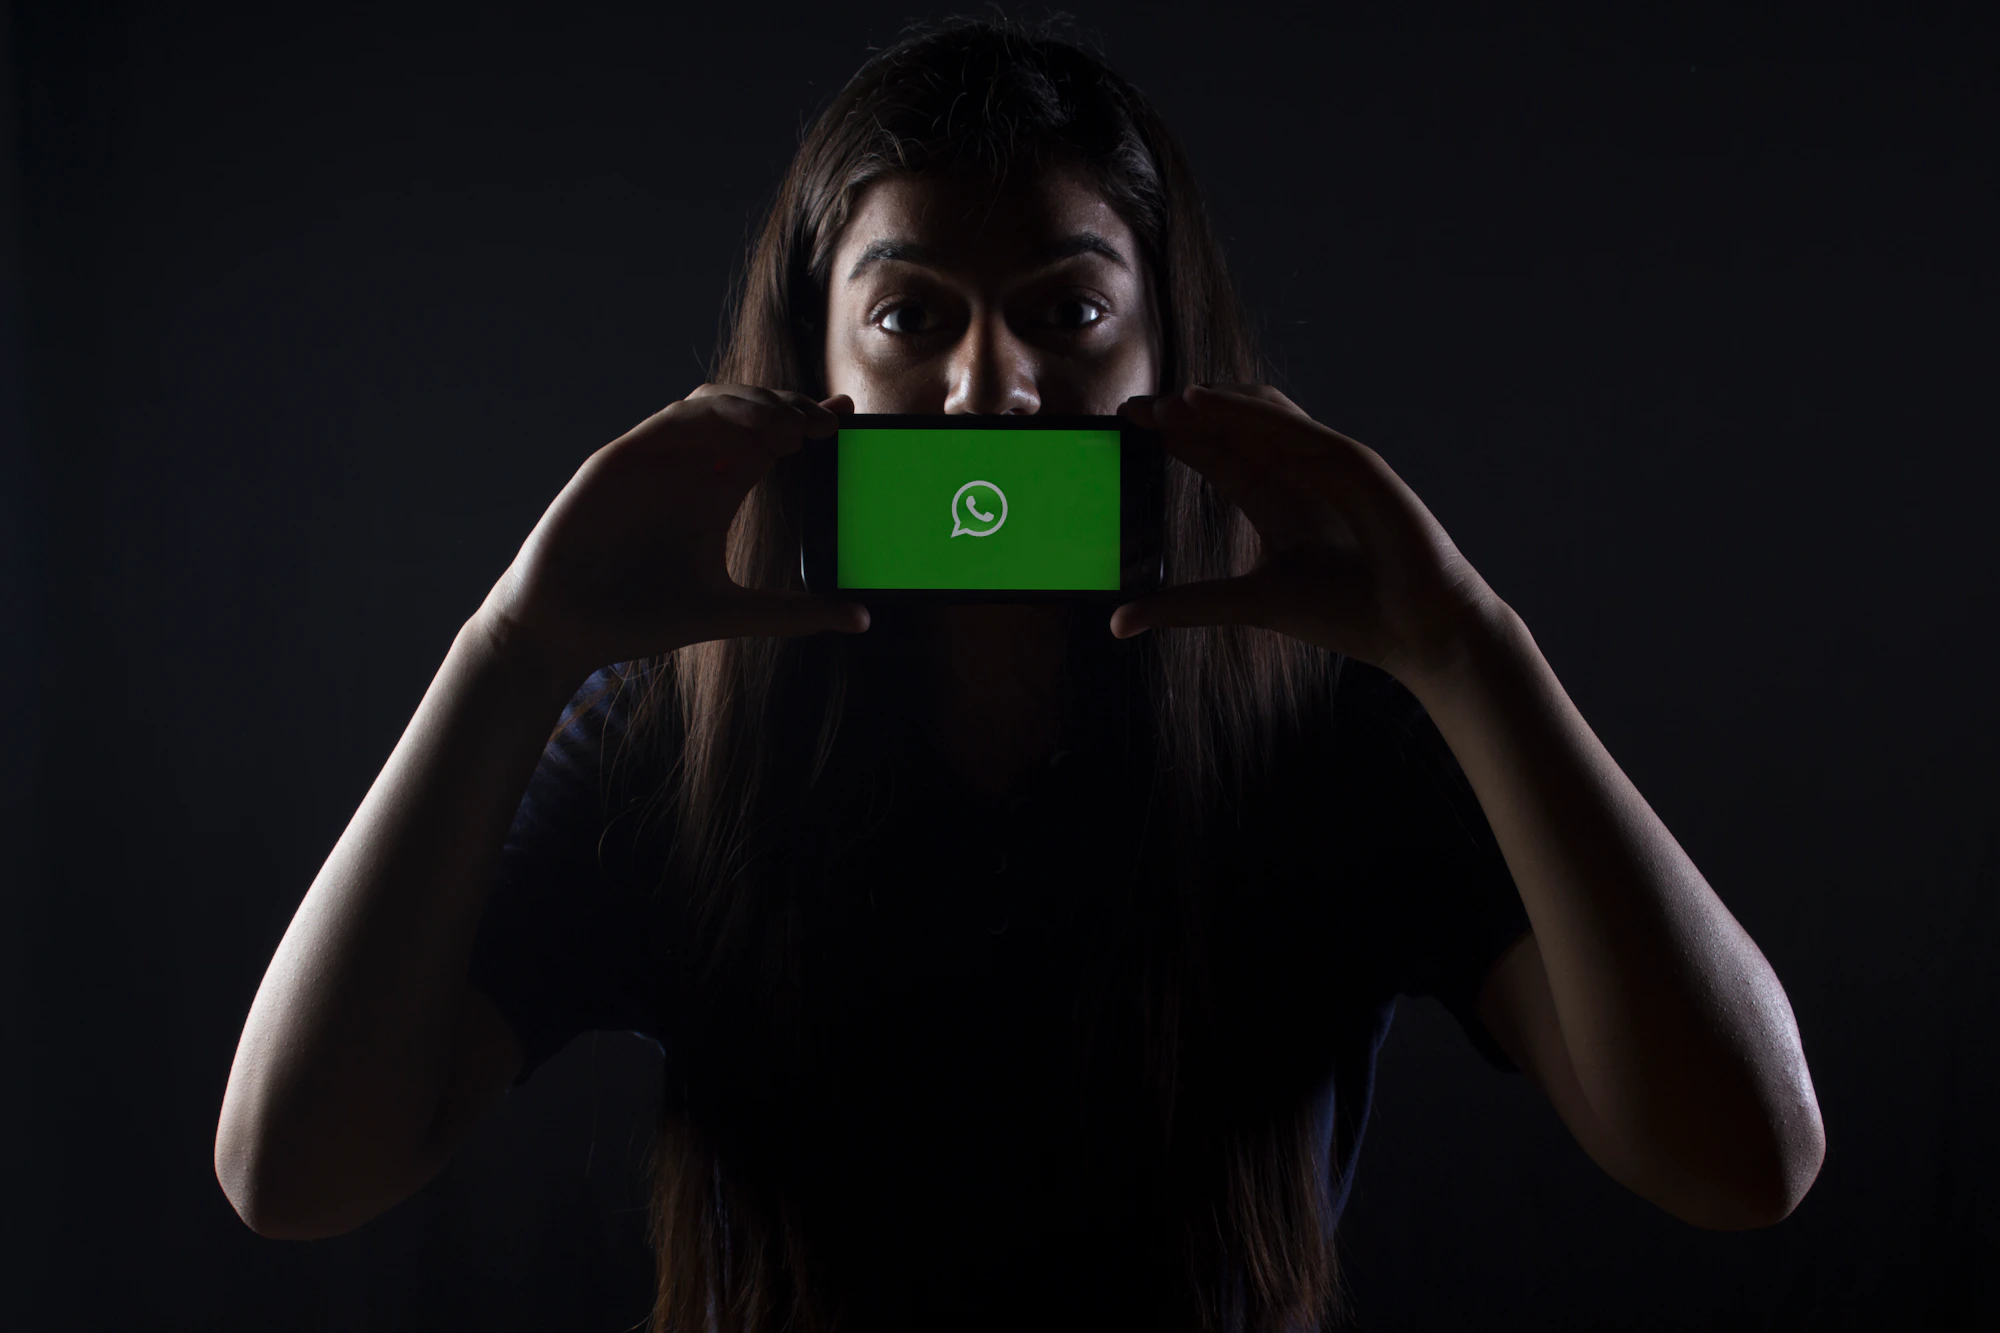 Fake WhatsApp apps are stealing users' data. Here's how to stay safe